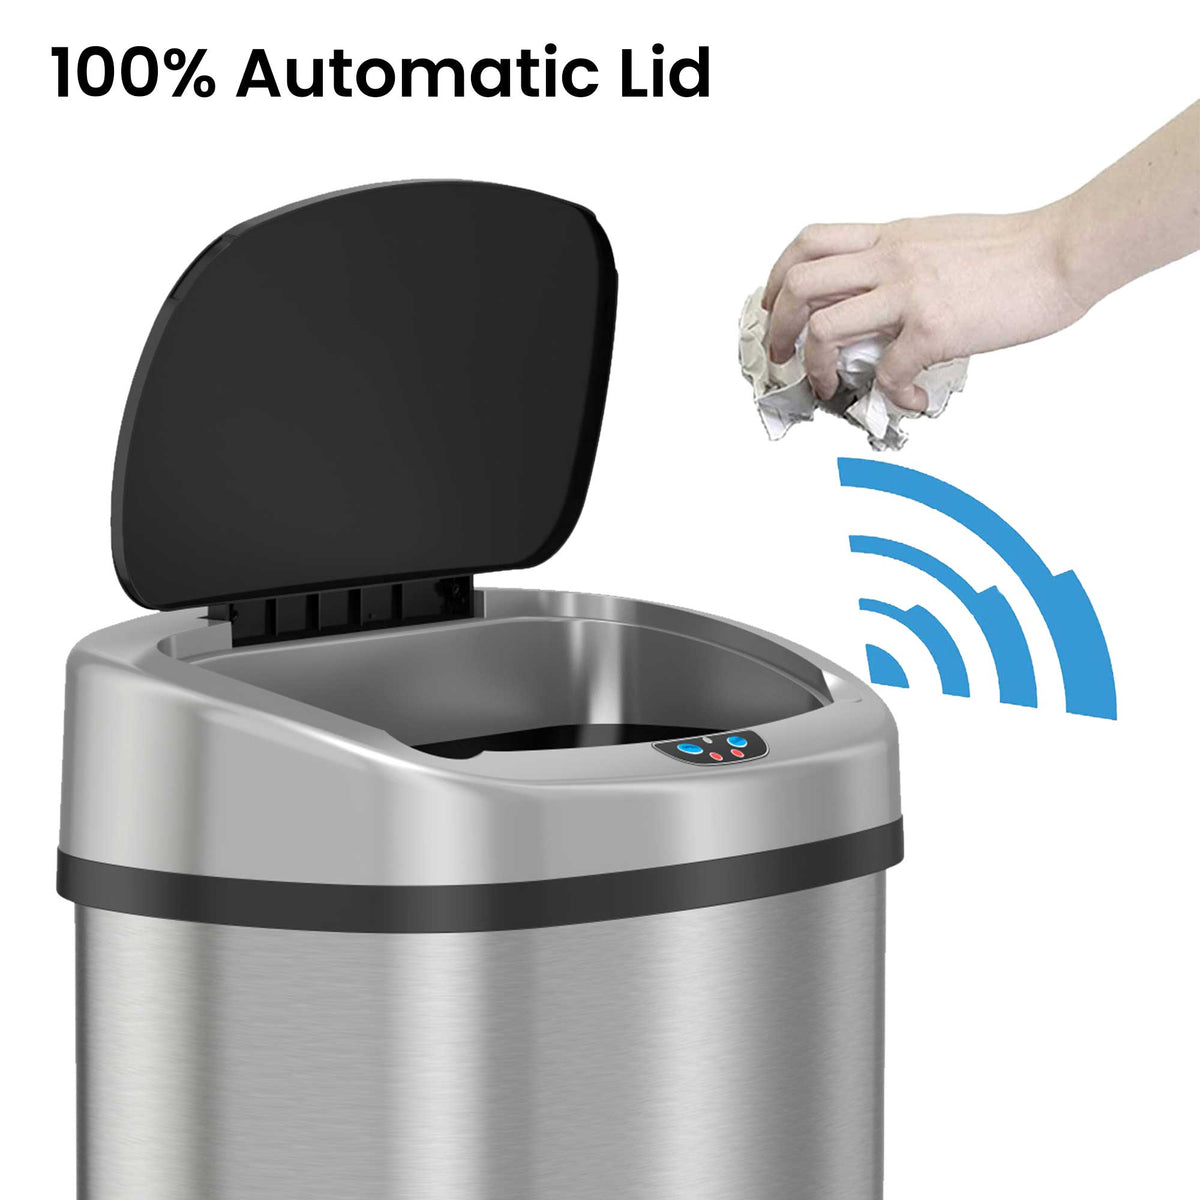 iTouchless IT13RX 13 Gallon Touchless Kitchen Garbage Trash Can